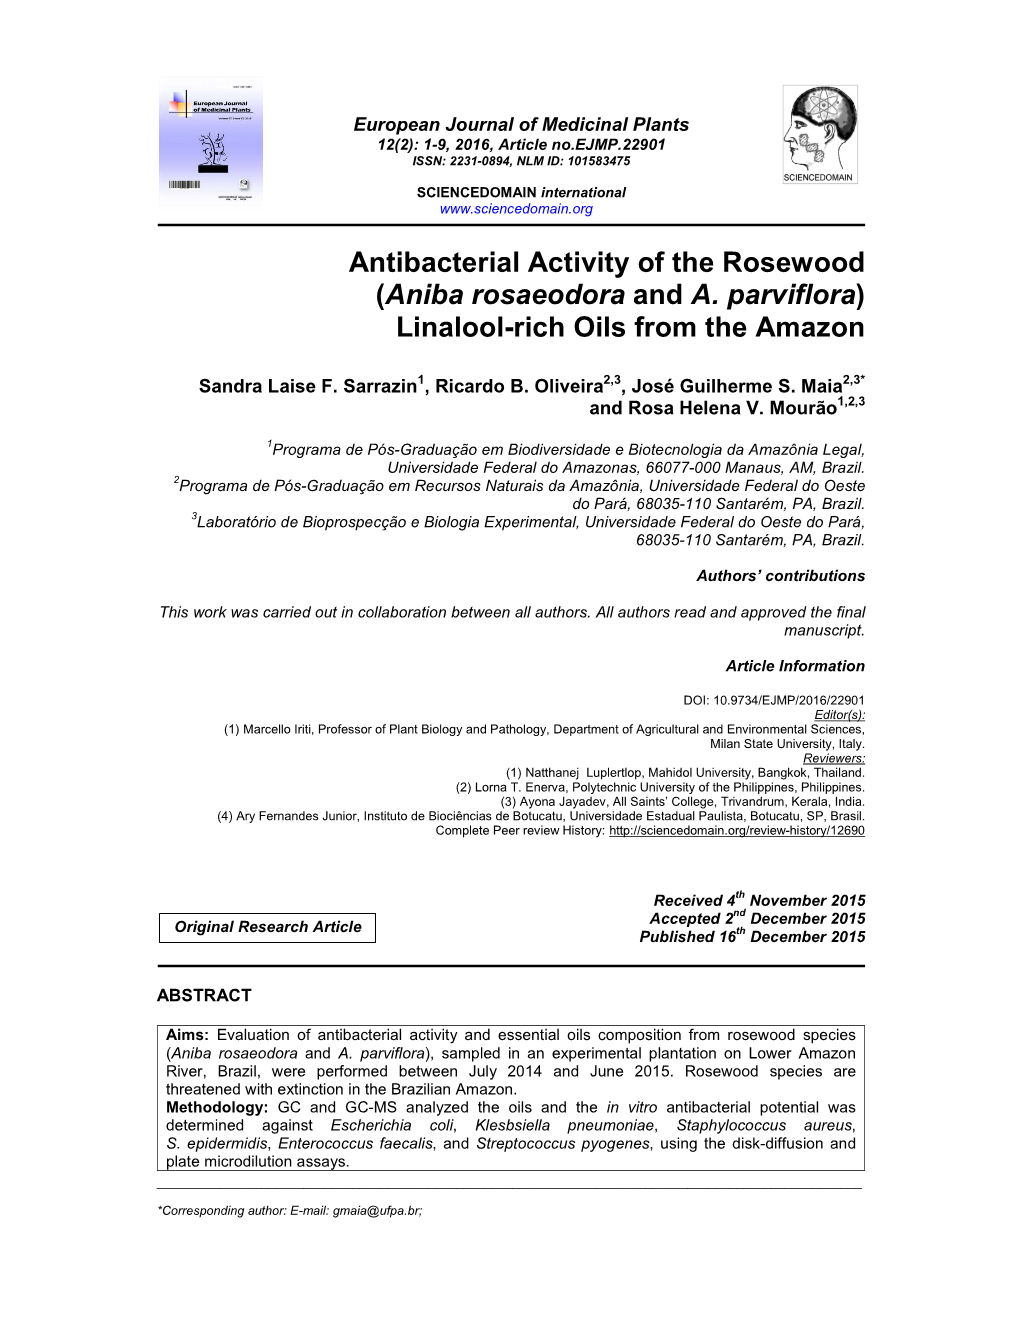 Antibacterial Activity of the Rosewood (Aniba Rosaeodora and A. Parviflora ) Linalool-Rich Oils from the Amazon